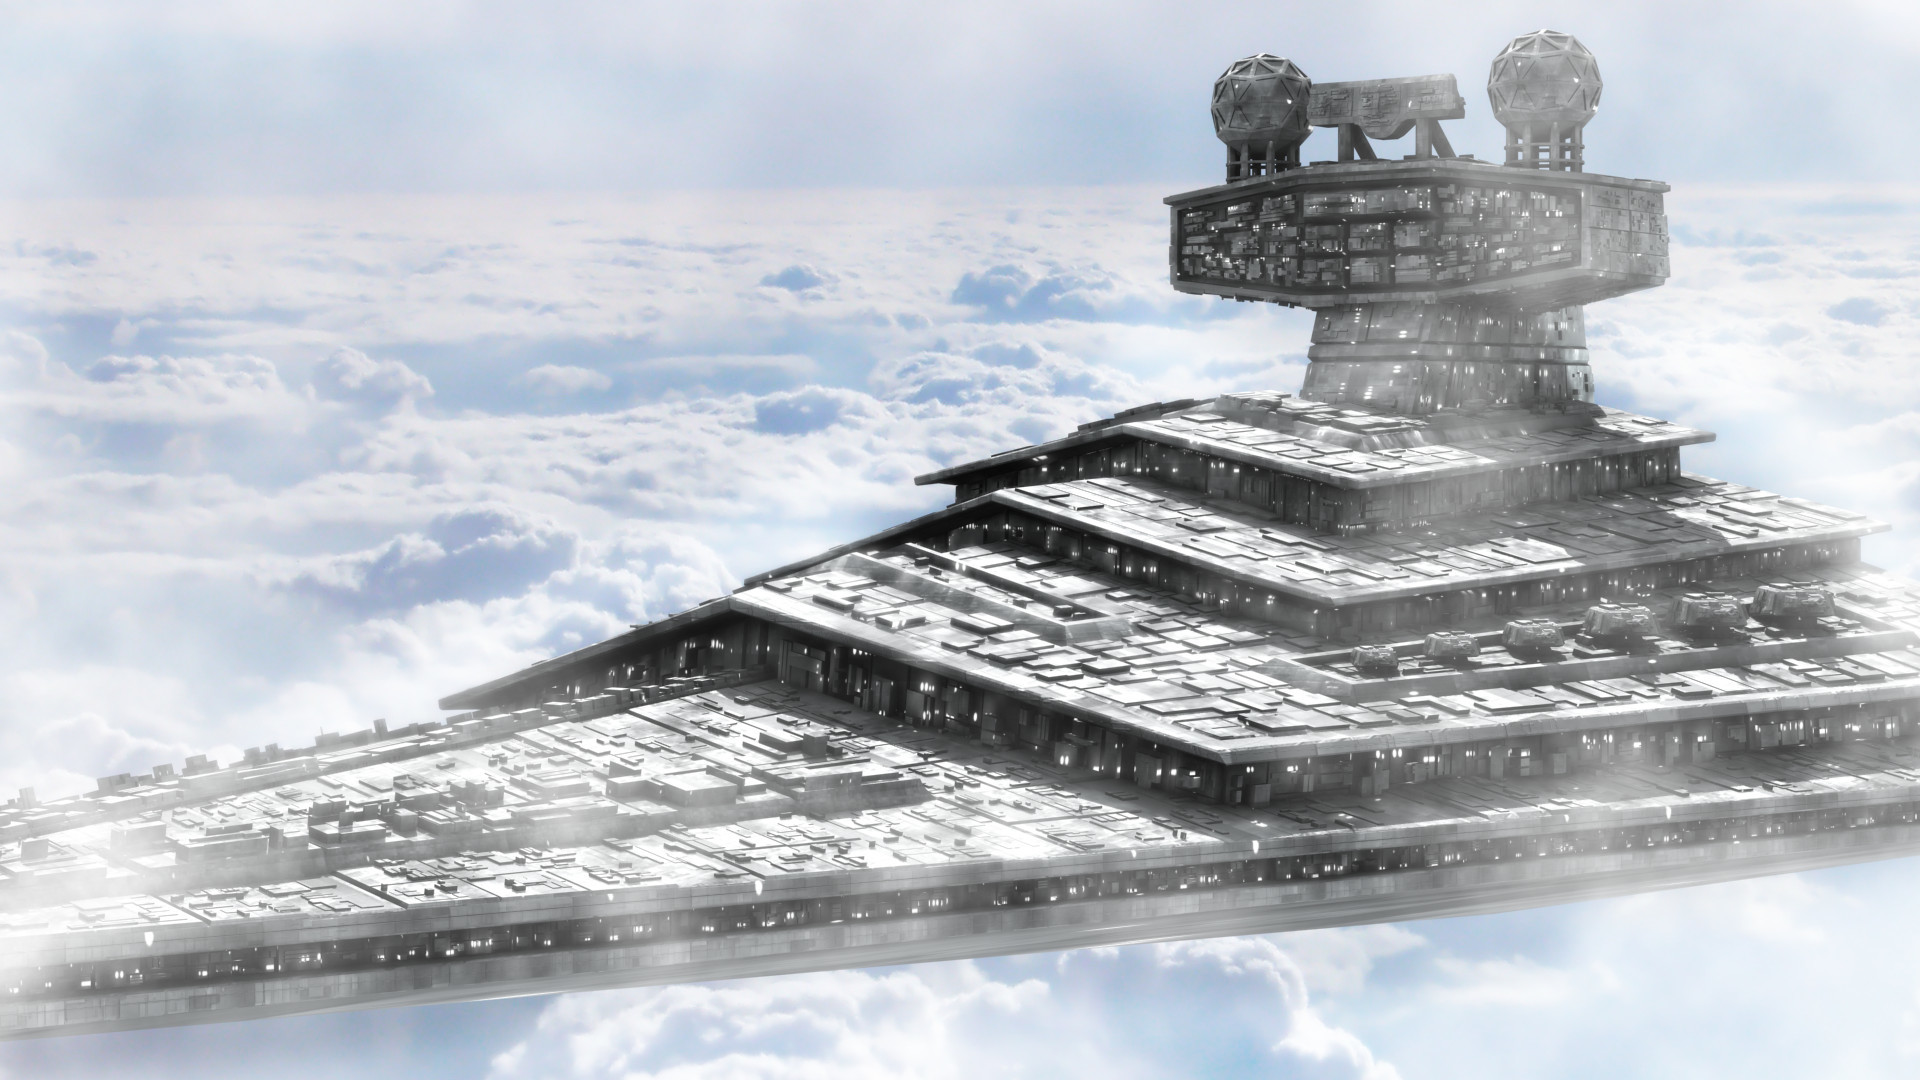 1920x1080 PreviousNext. Previous Image Next Image. star wars star destroyer wallpaper  ...